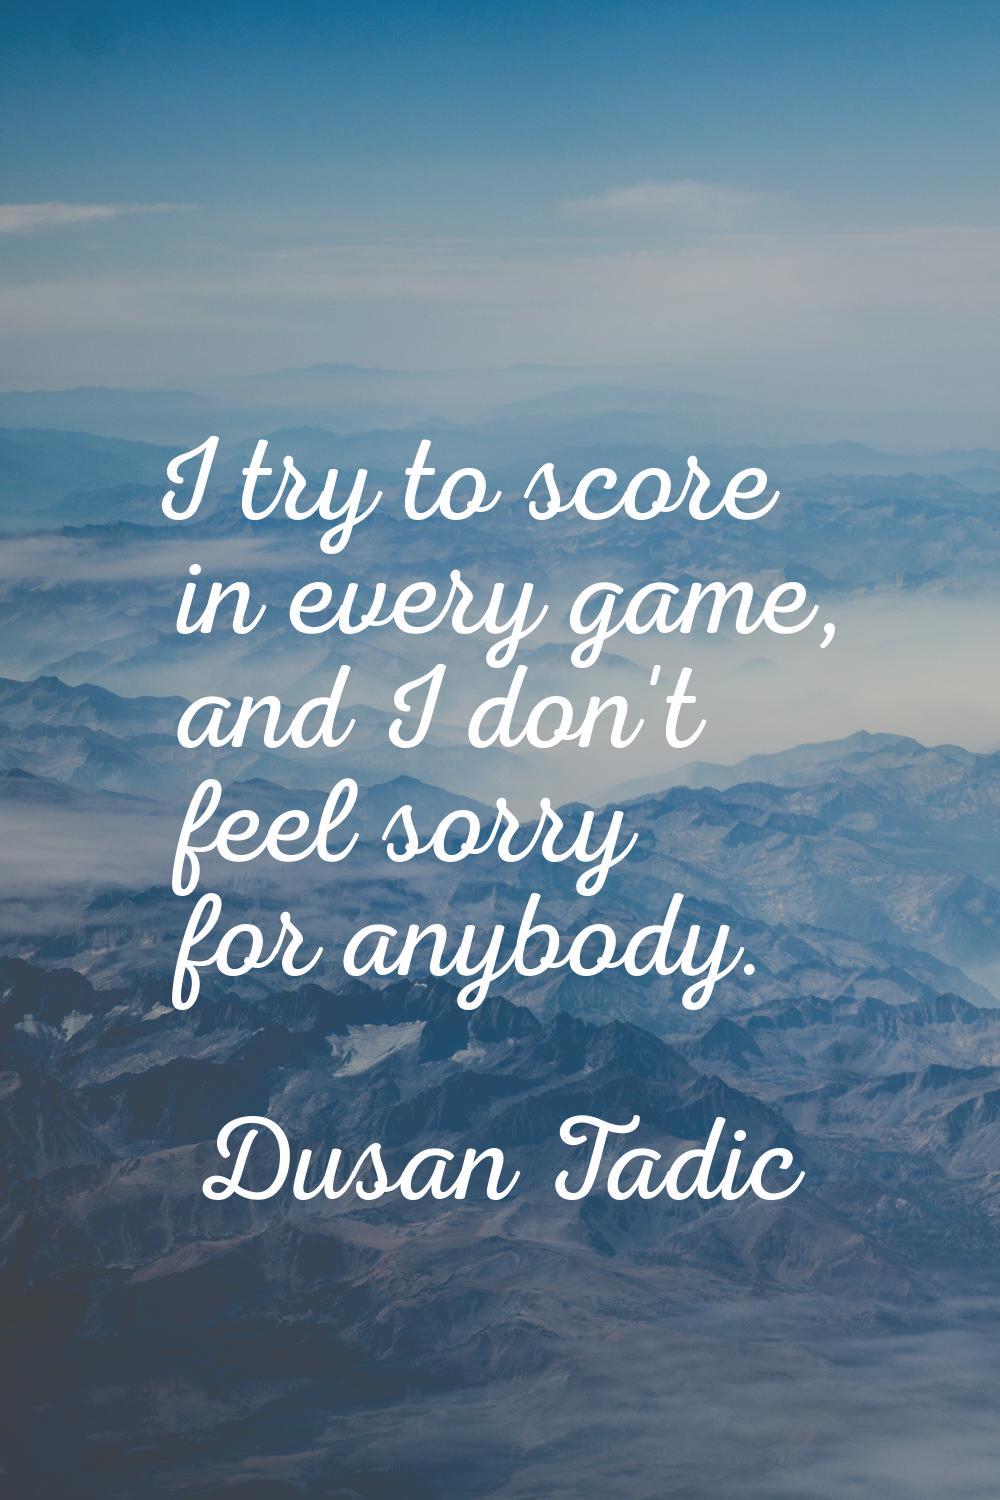 I try to score in every game, and I don't feel sorry for anybody.